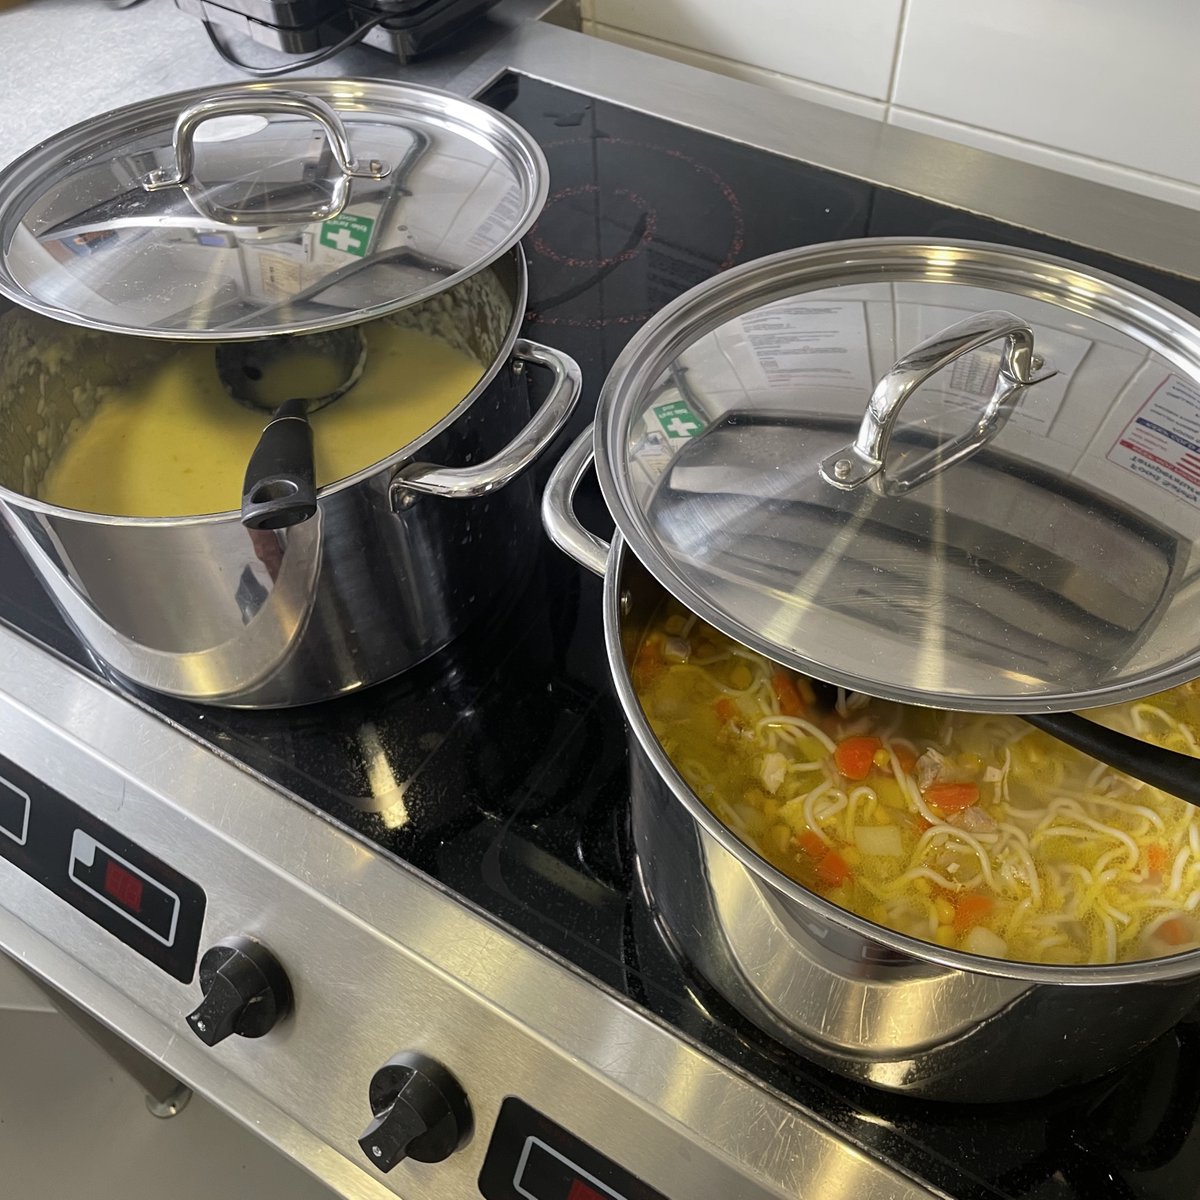 As of next week, we have come to an end of our Winter Warmer Soup & Stew day! We'll miss our amazing chefs but don’t worry... our Community Cook Up’s are still running every Thursday!